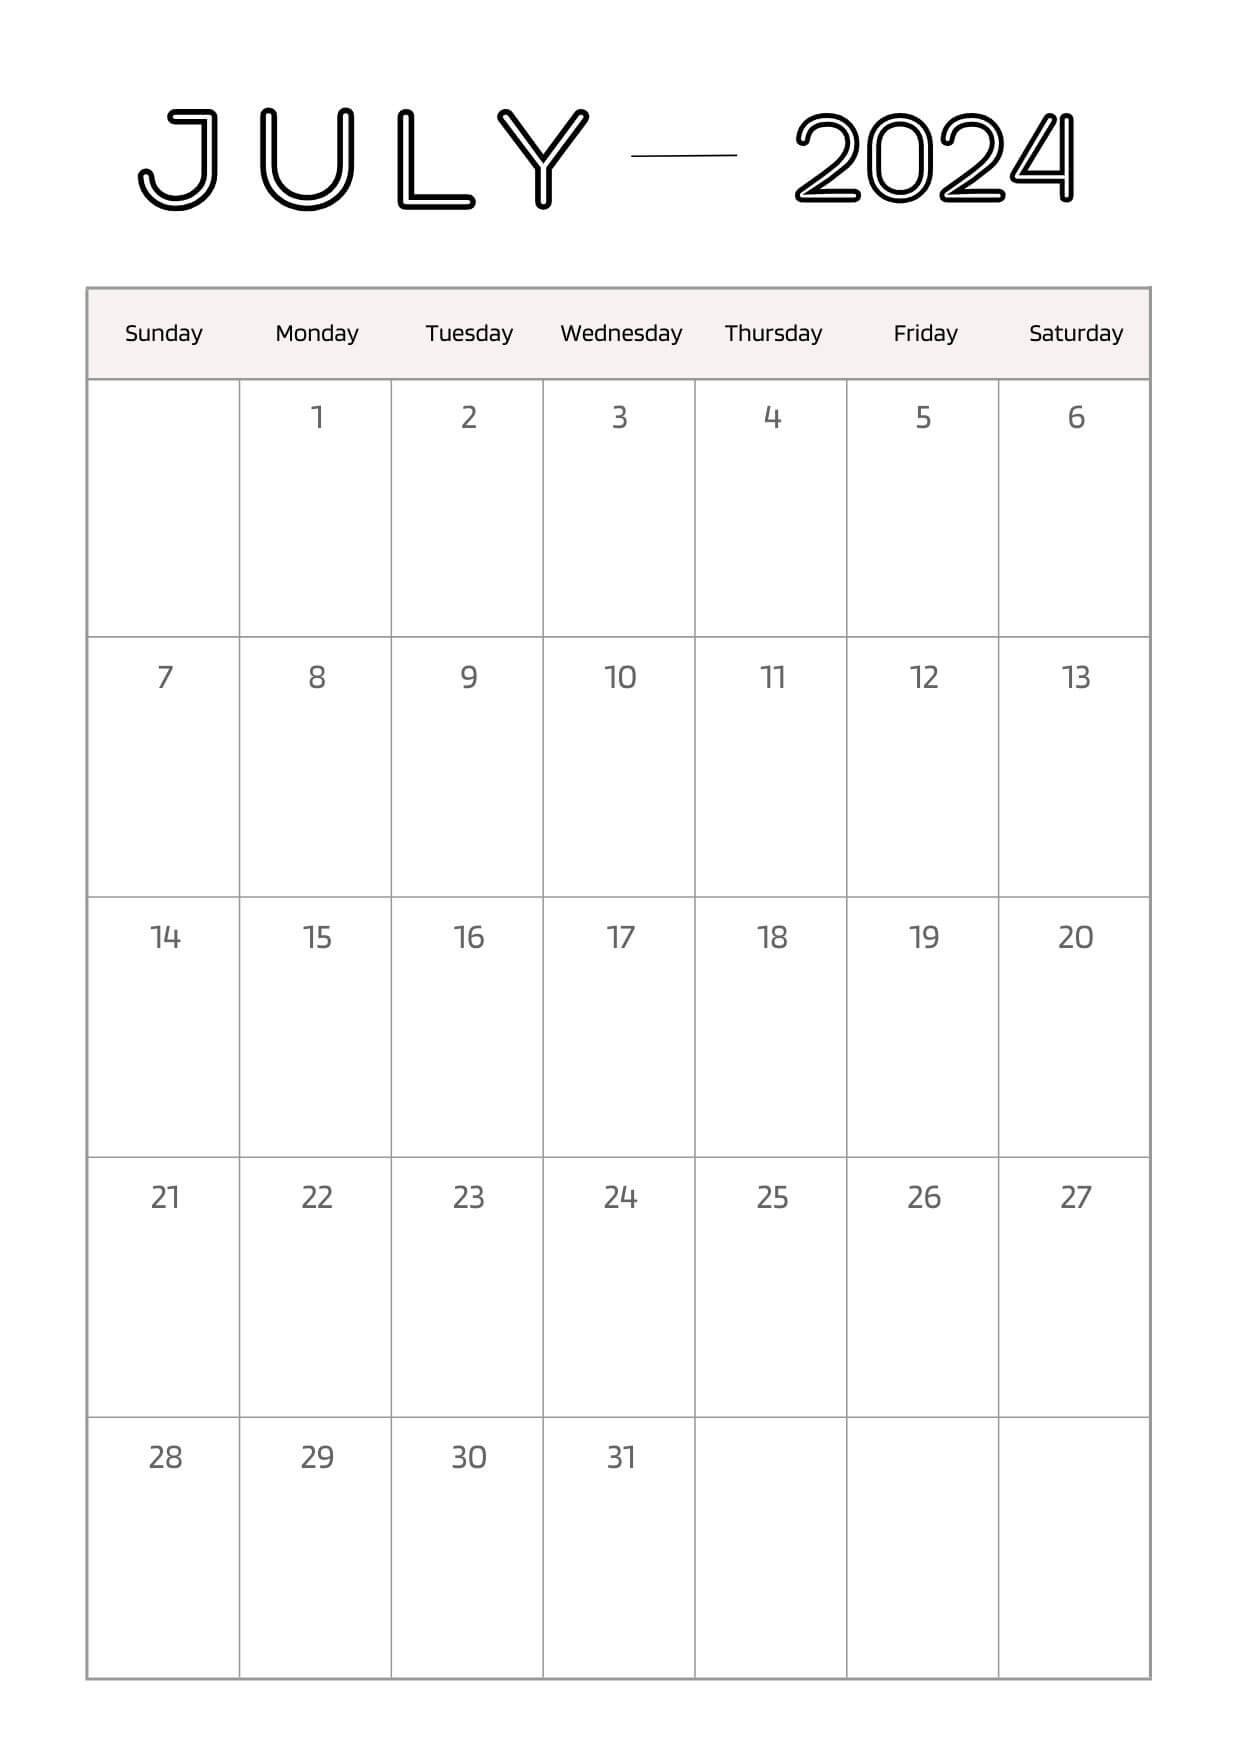 July 2024 Calendars Pack with numbers and a few days of the week